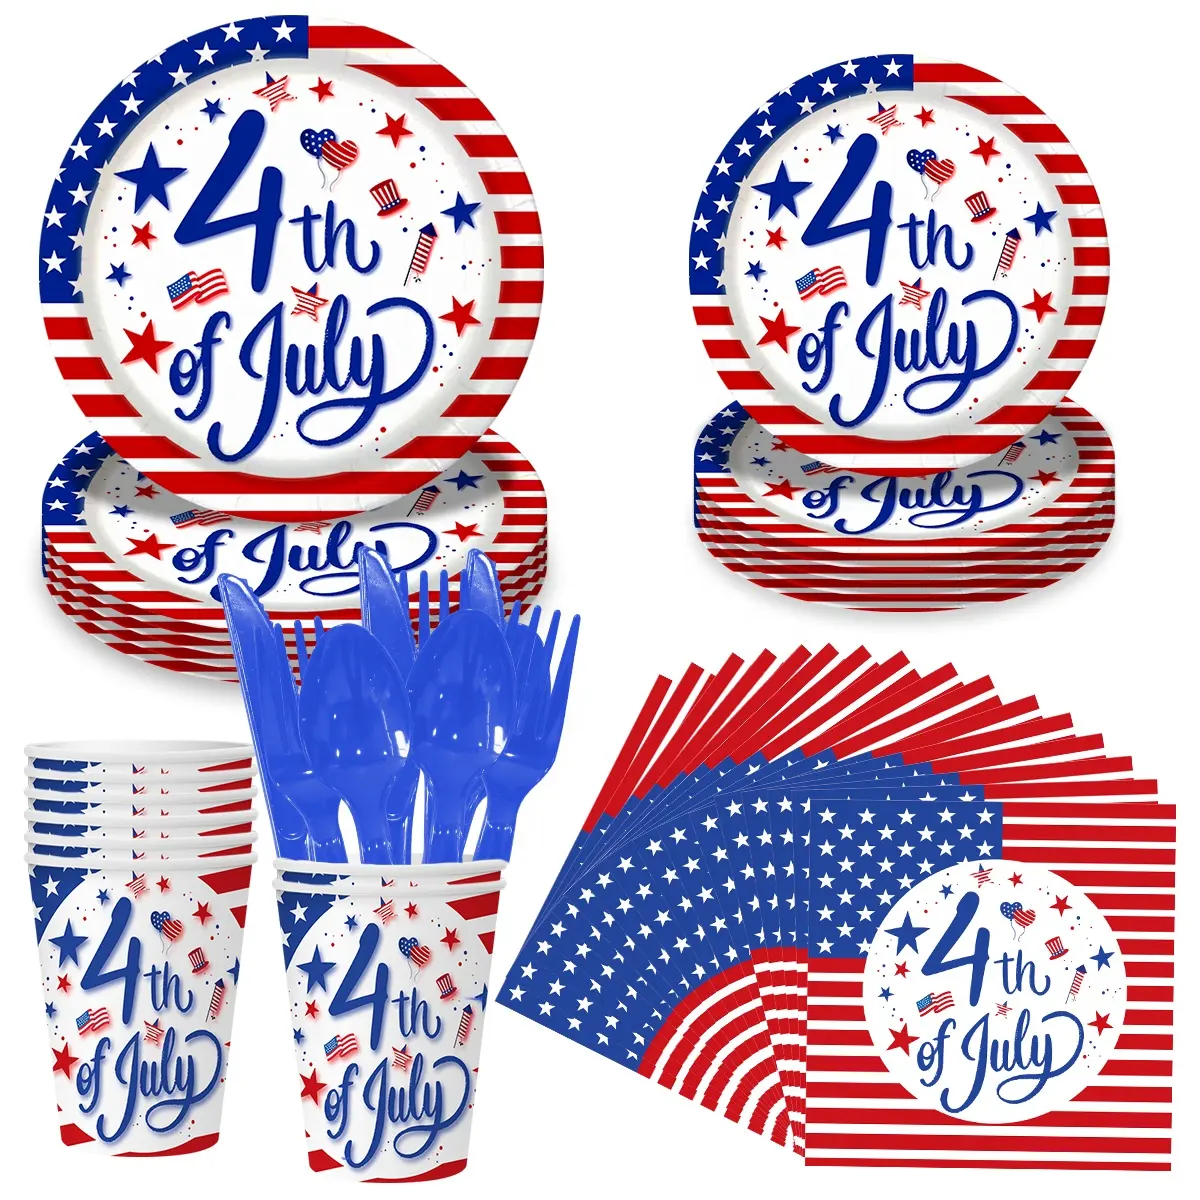 Umiss Paper 4th of July Party Decorations Disposable Tableware include Paper Plates Cups Napkins for America Independance Day